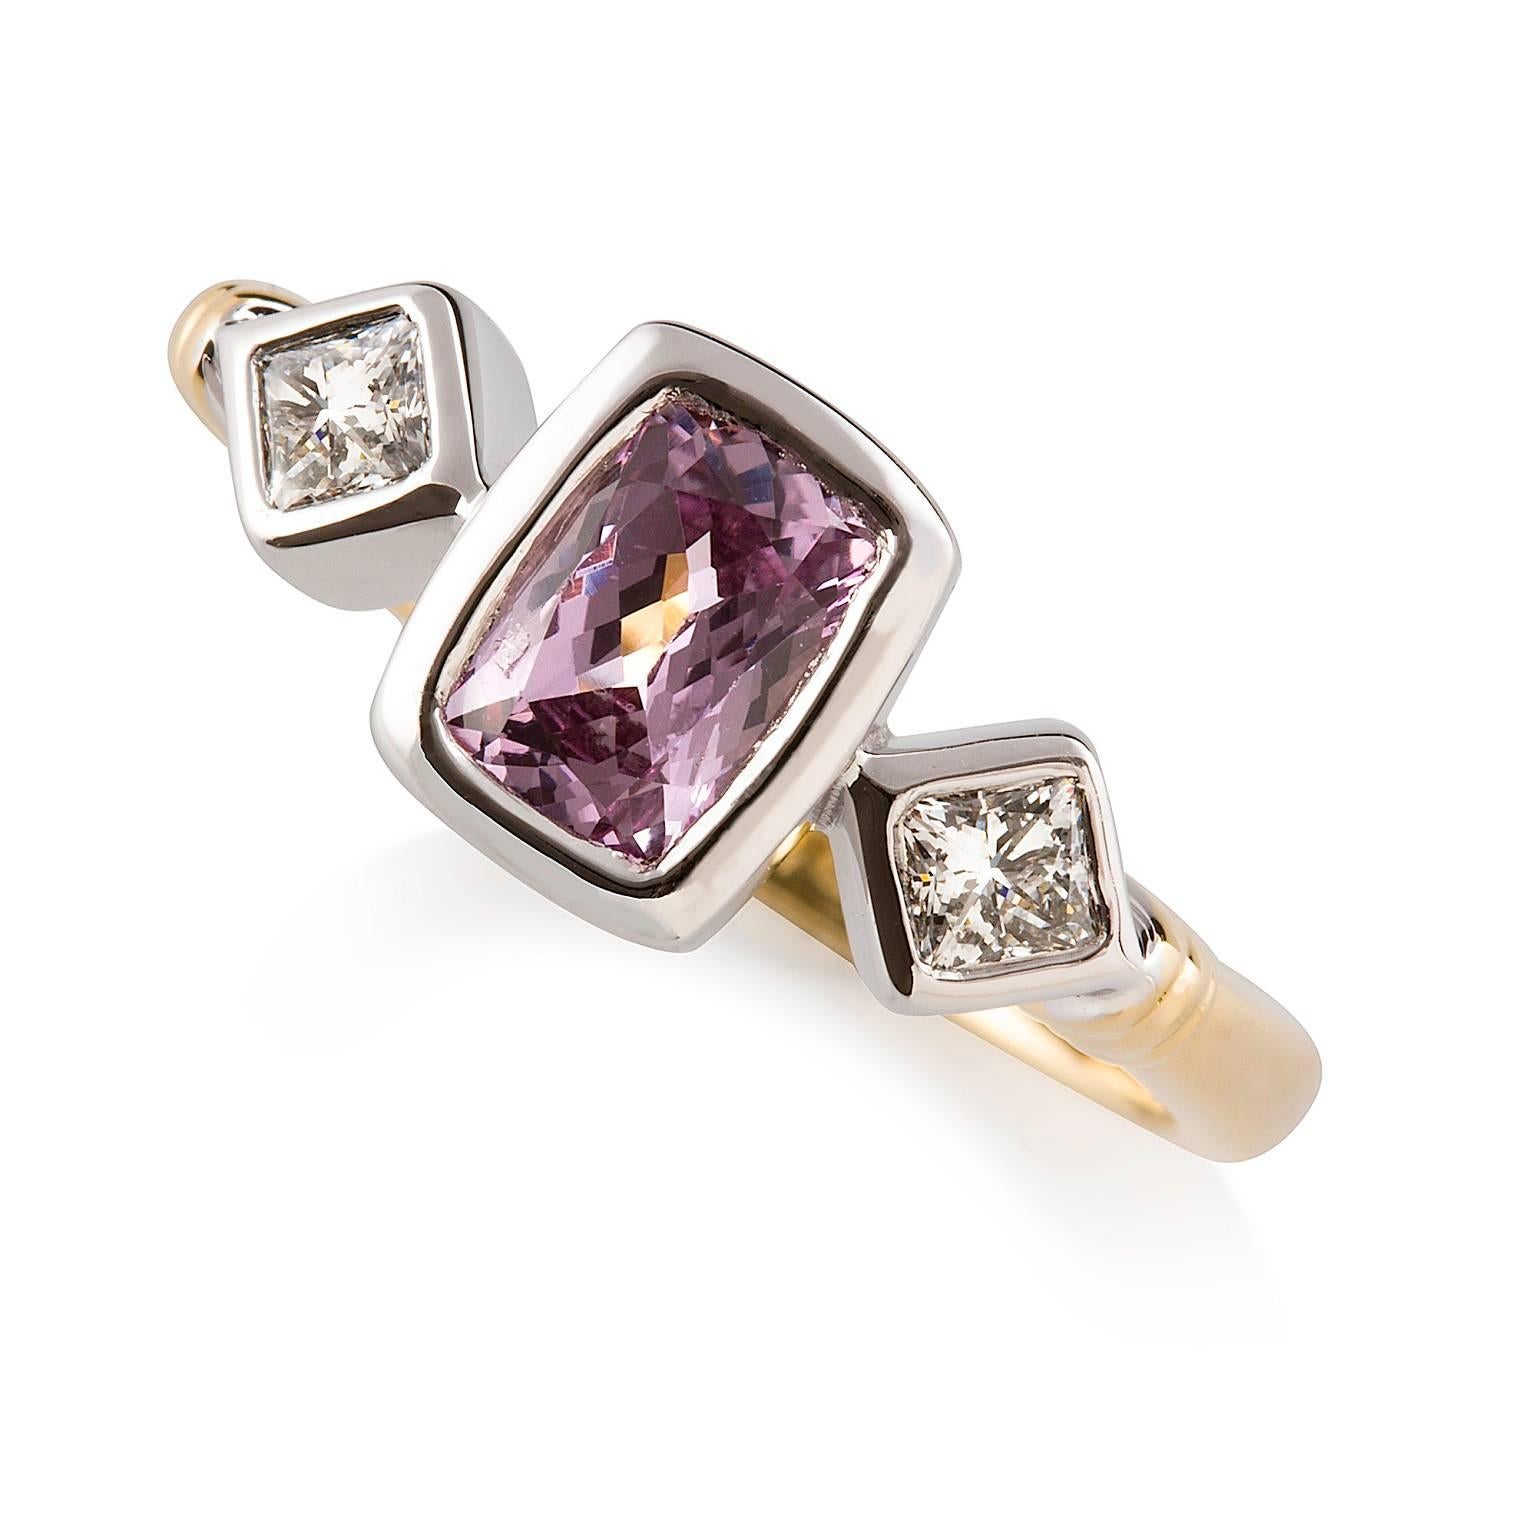 Rosa Zaffiro Ring

This gorgeous two-toned handmade dress ring features a stunning pink sapphire that is complimented with princess cut diamonds on either side, all set in 18ct white gold. The band is made of 18ct yellow gold with an understated